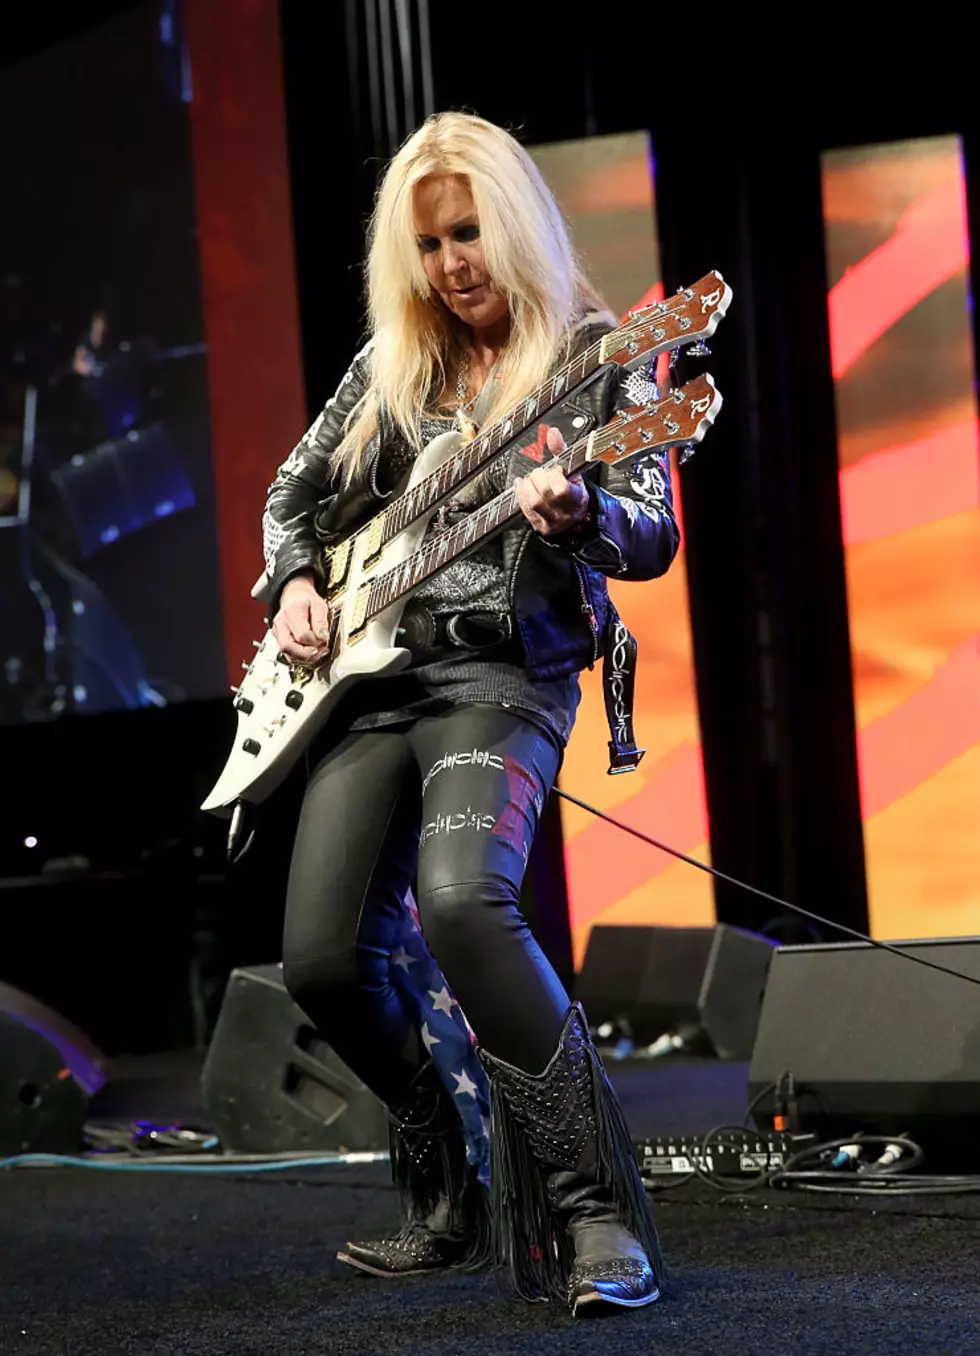 Lita Ford Recalls First Learning How To Play Guitar